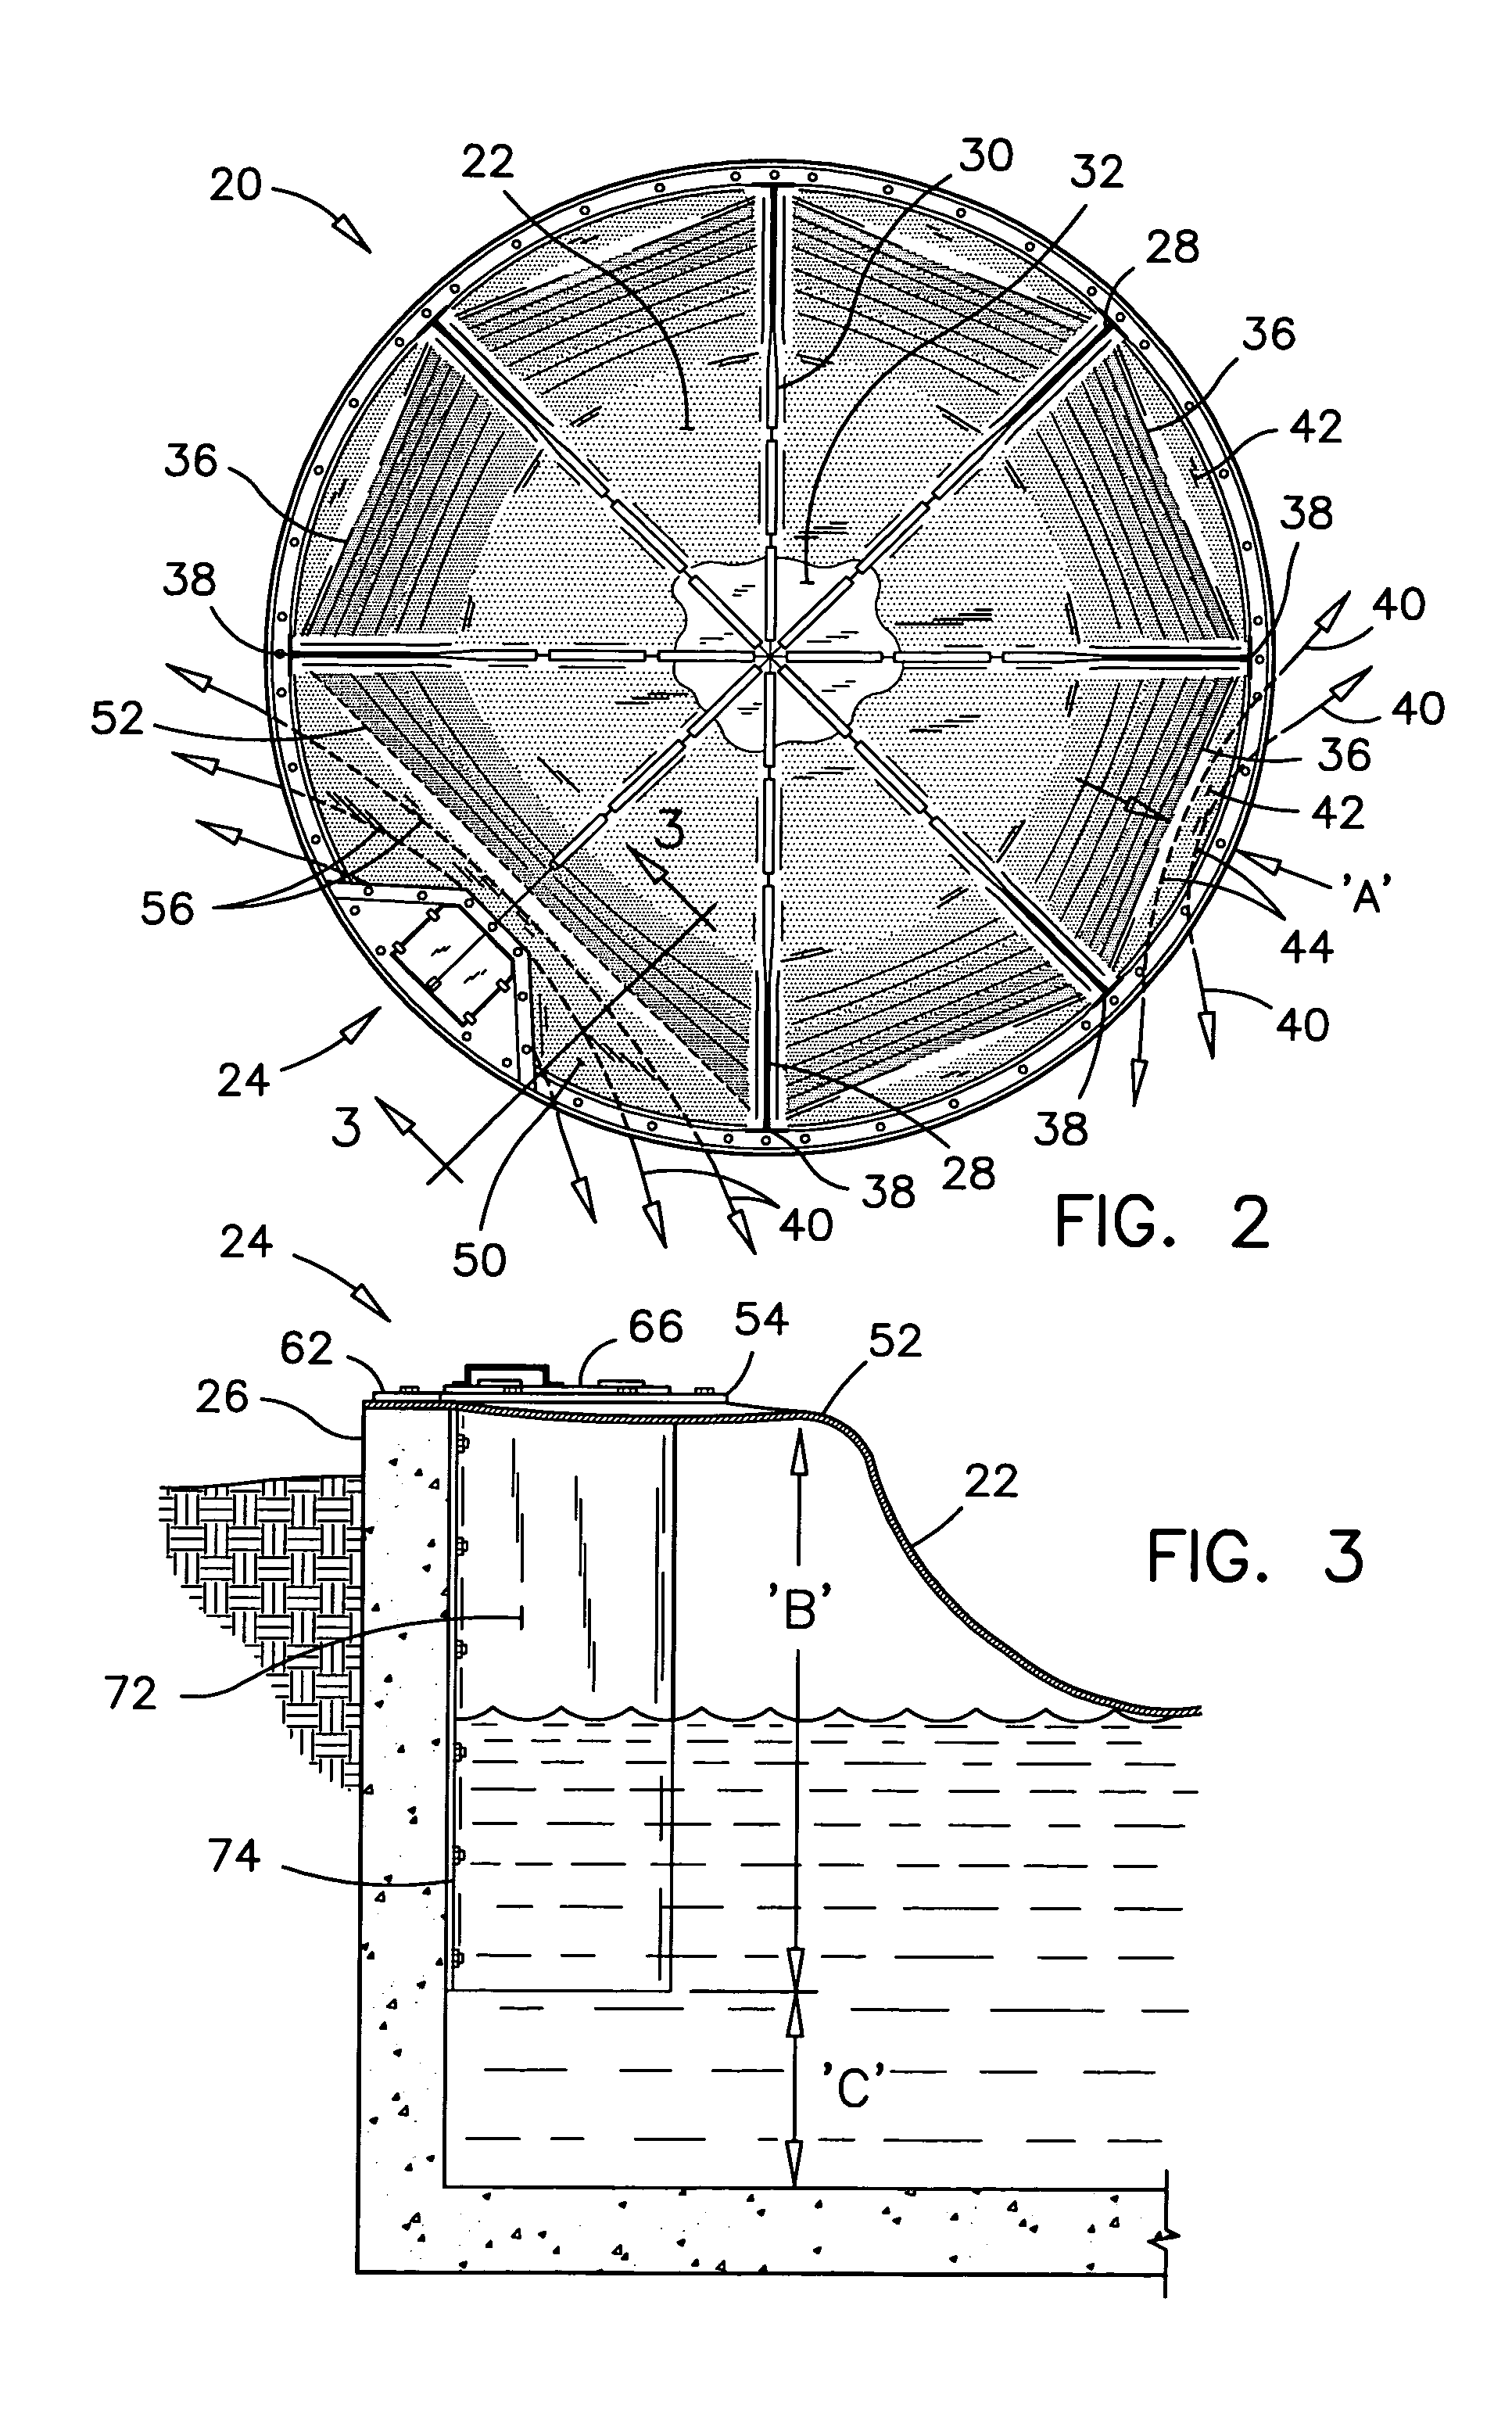 Membrane-covered reservoir having a hatchway therein